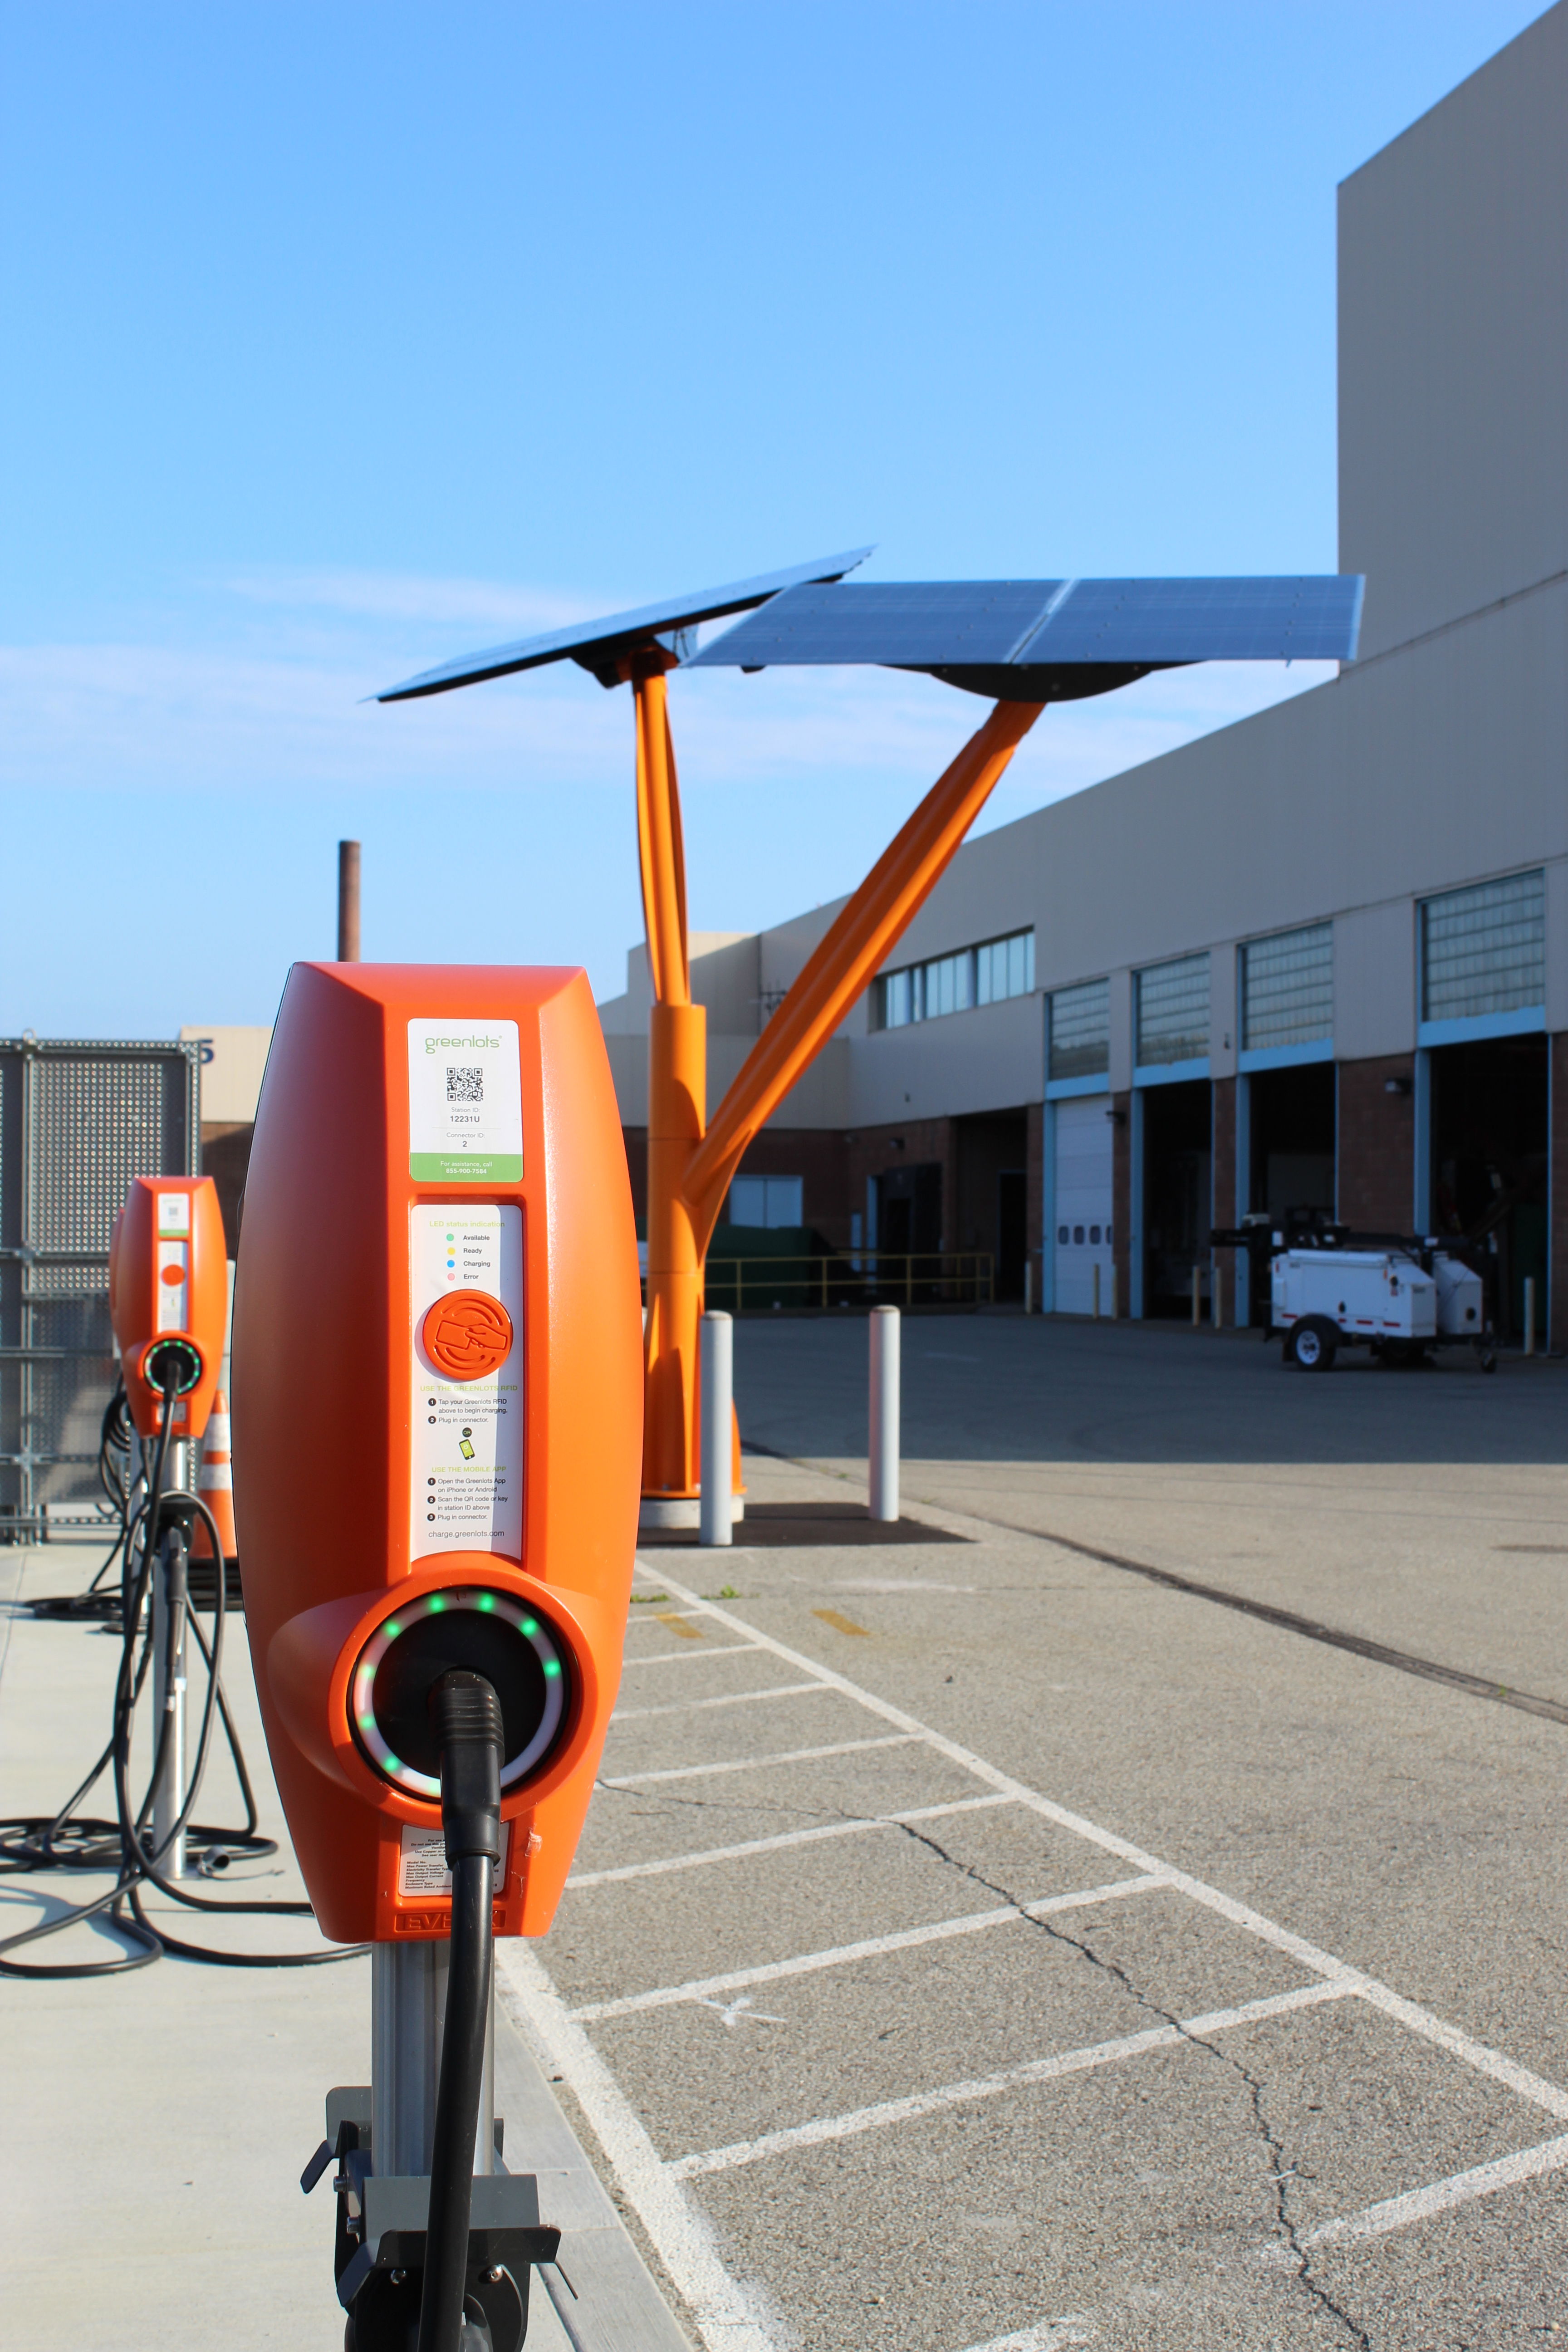 The campus’ 20 EV chargers, which will be powered by the panels and tree, accommodate the company’s growing electric fleet and employees who drive EVs.